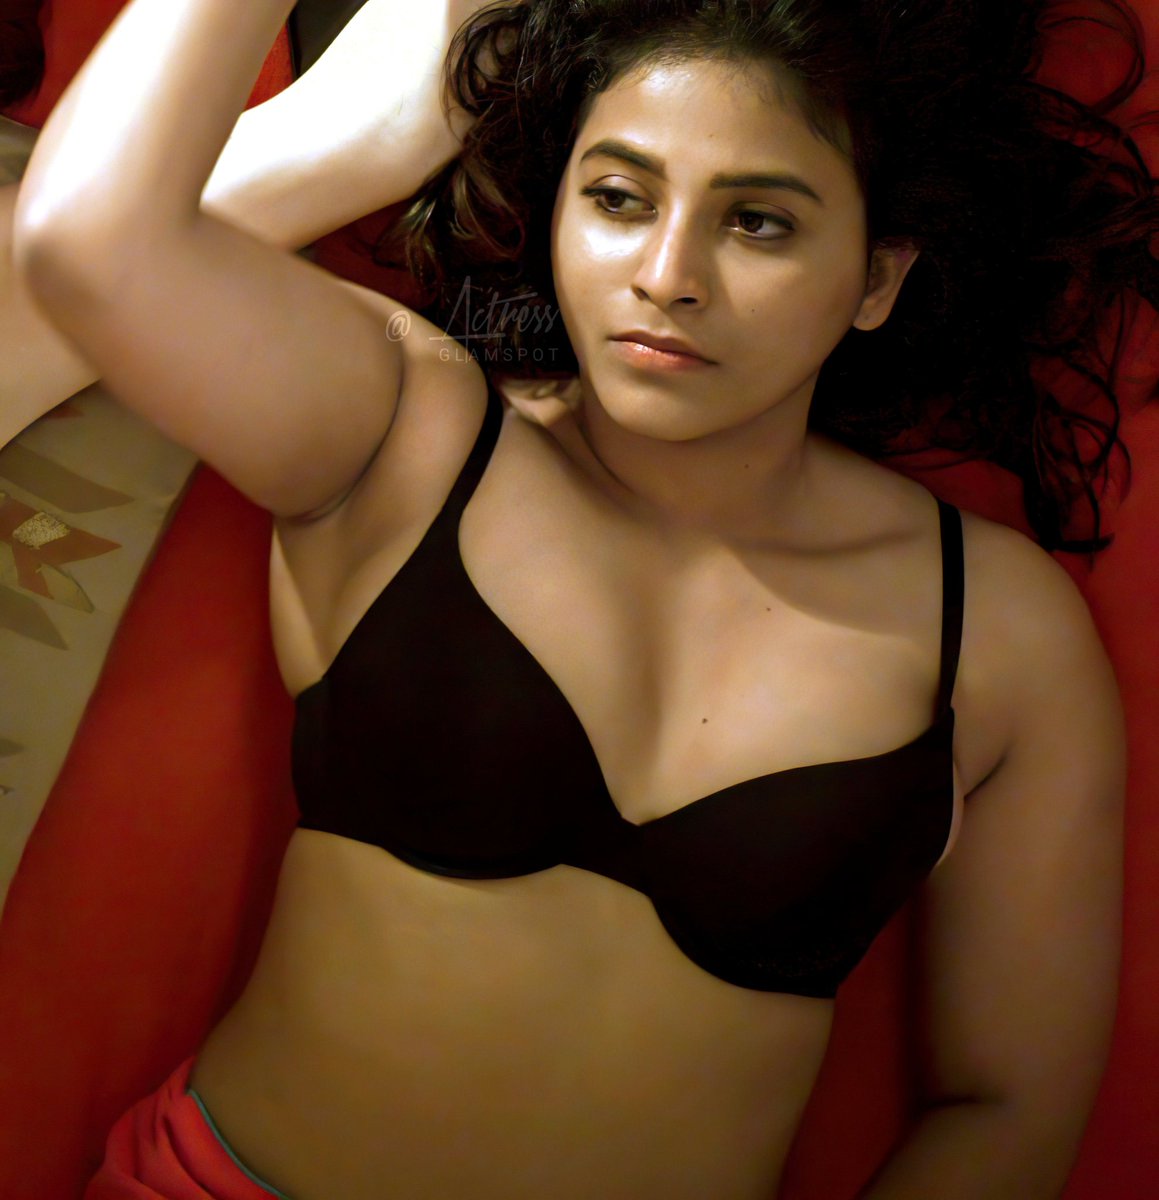 Actress World 💃 on Twitter: "Actress #Anjali Unexpected Hot 🤗from  #PaavaKadhaigal Web series #PaavaKadhaigalTrailer @ActressWorld14  #Actressworld https://t.co/0xx8RKfpRR" / Twitter